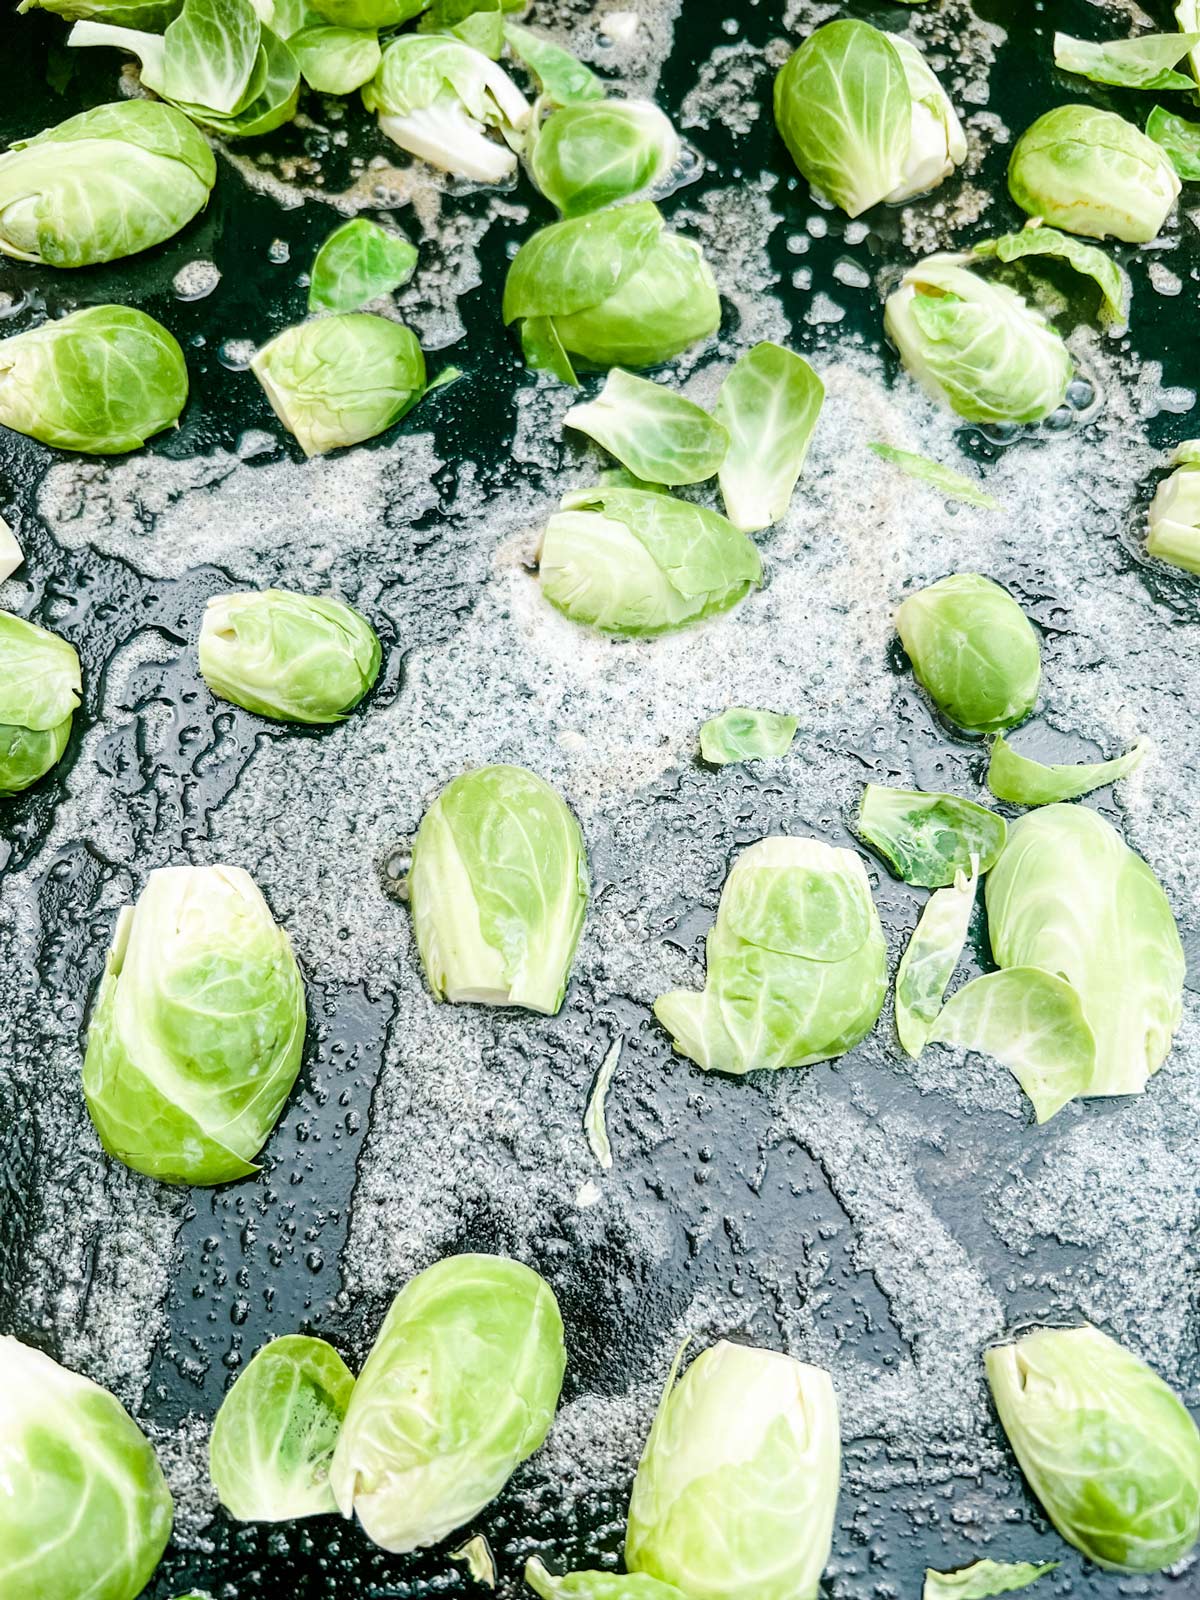 Raw Brussels sprouts that have just been added to a Blackstone griddle.